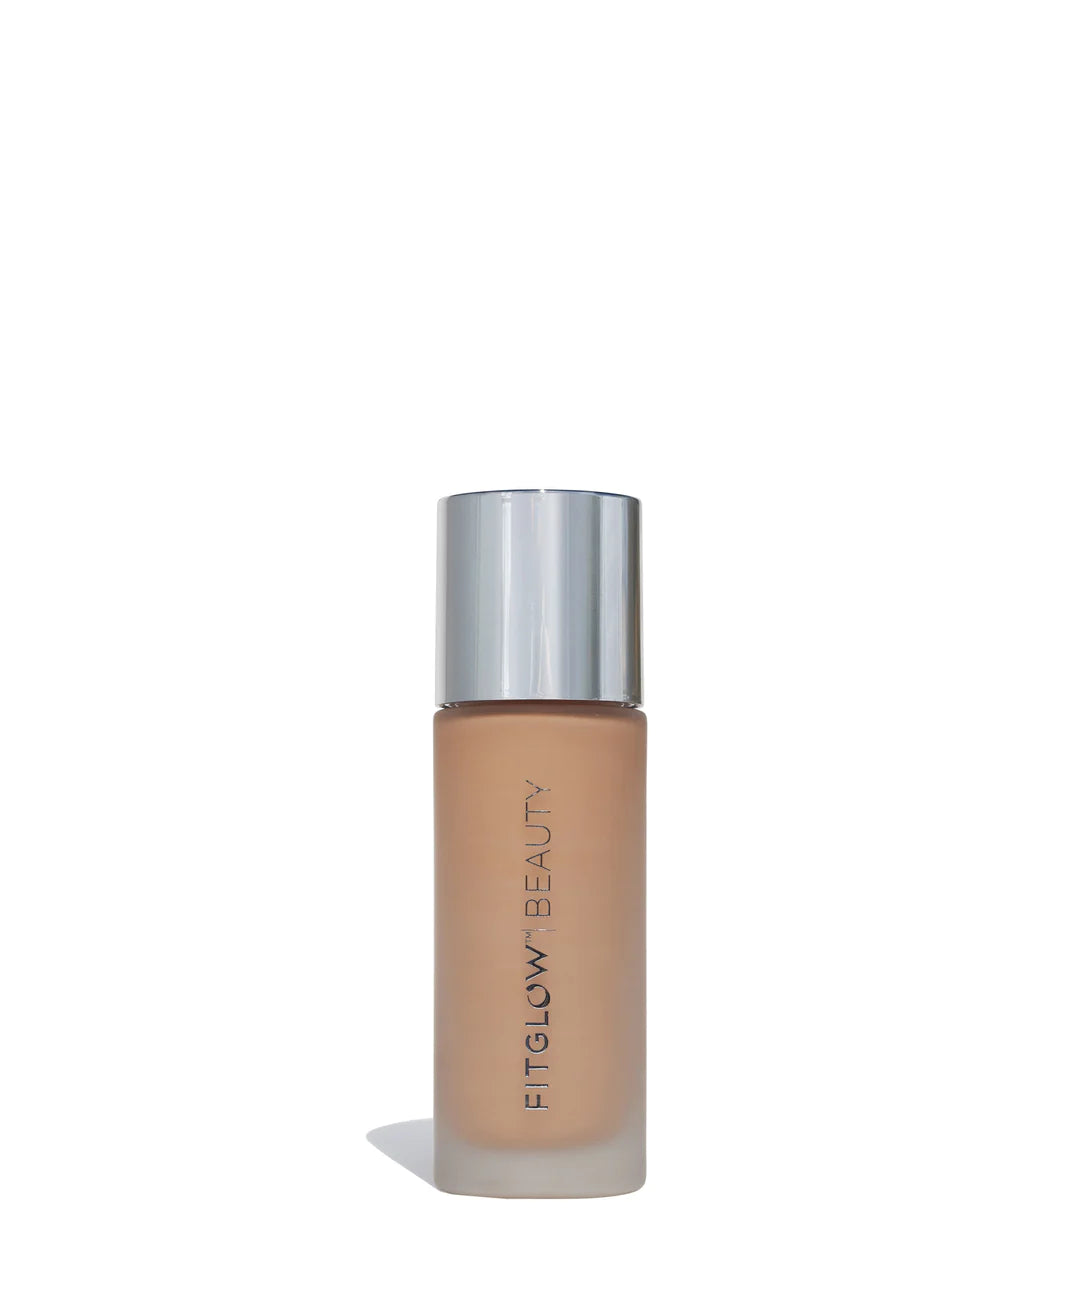 Foundation+ Herbal Hyaluronic and Vitamin C Photo-Filter Foundation